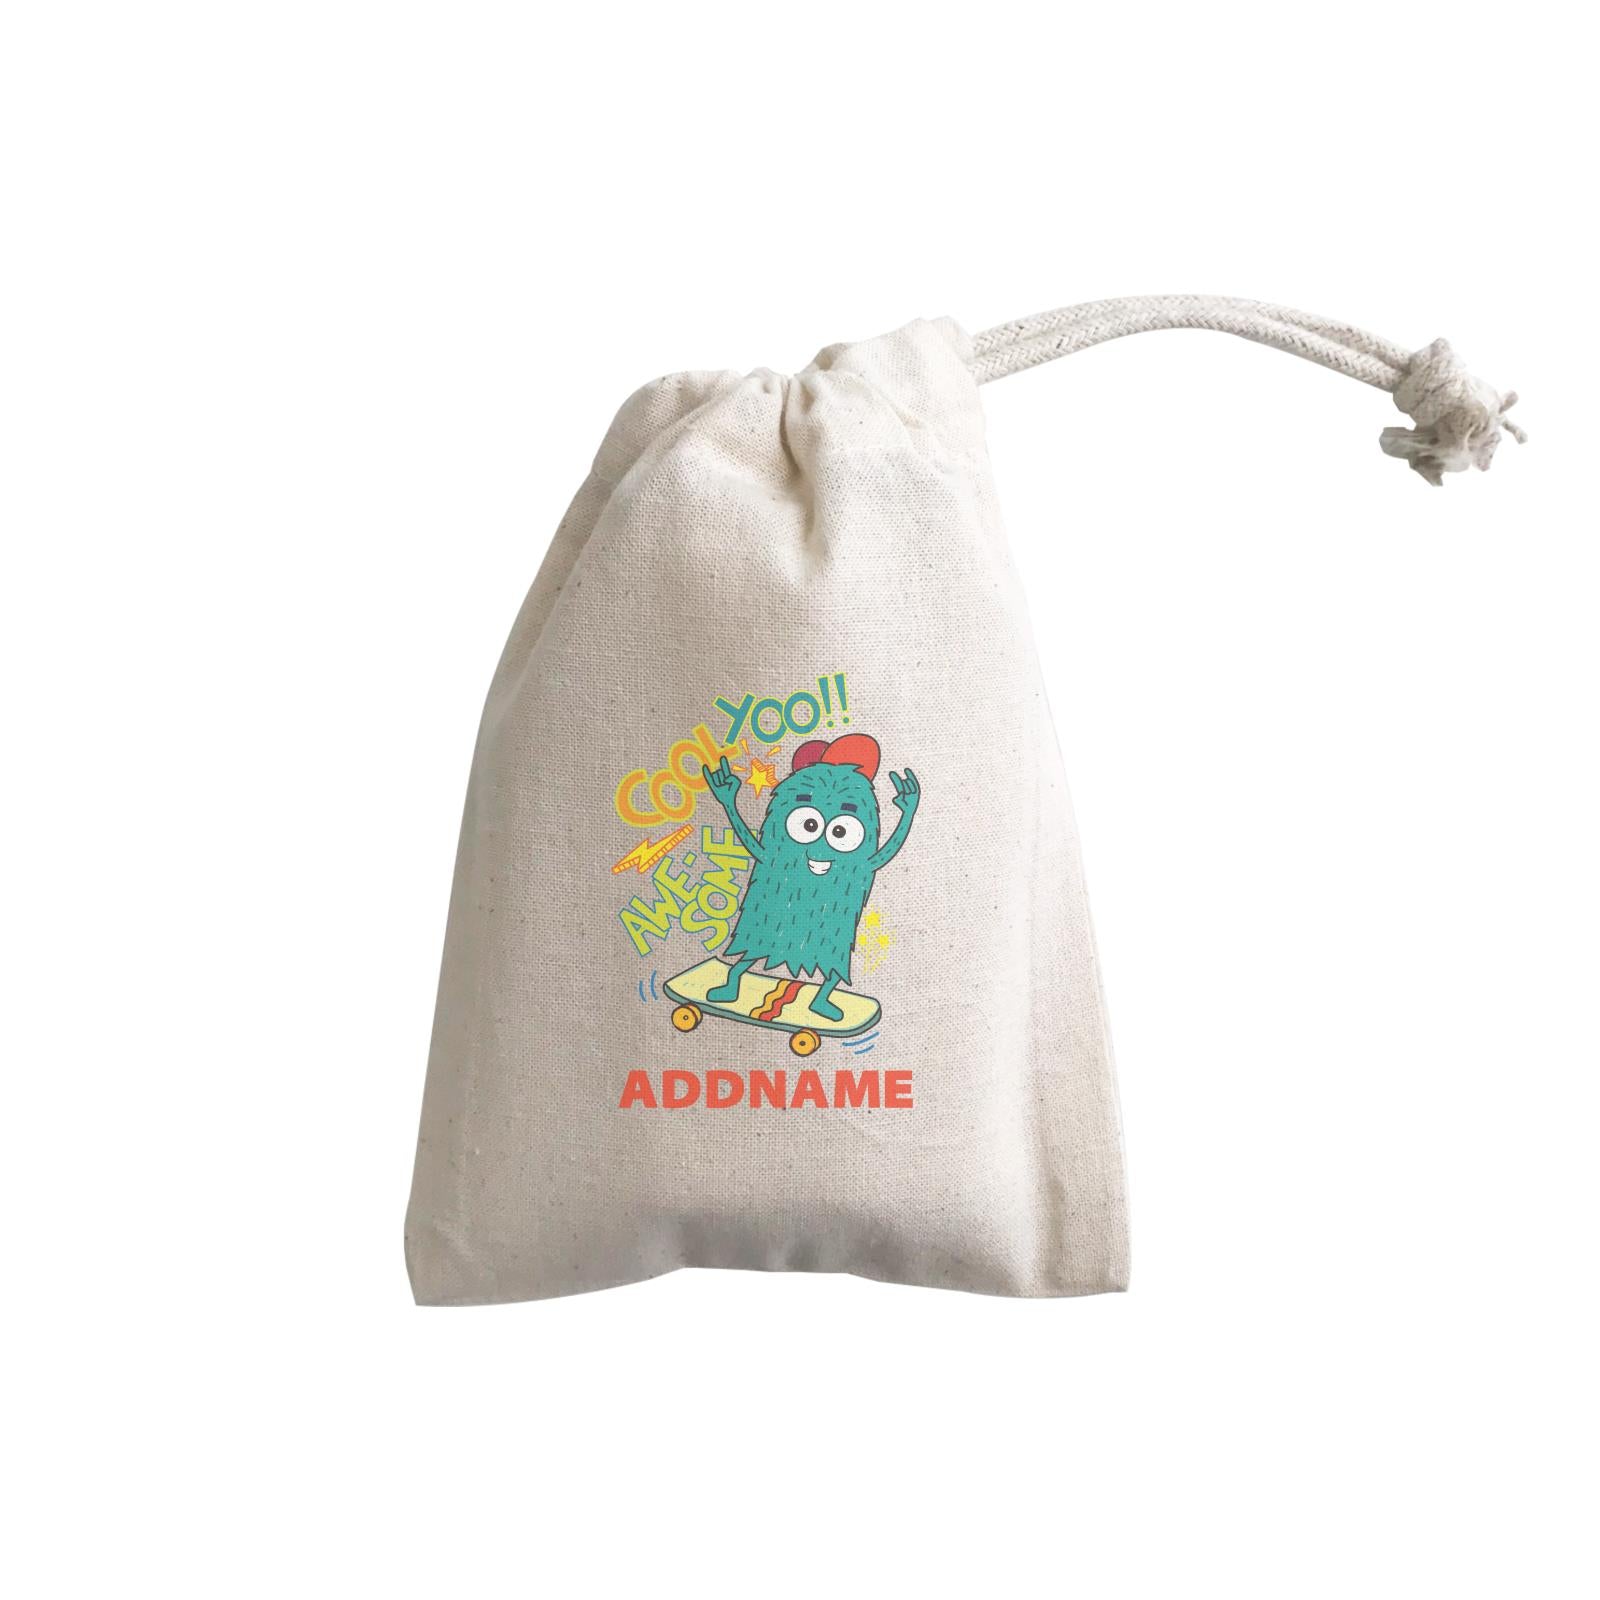 Cool Cute Monster Cool Yoo Awesome Skateboard Monster Addname GP Gift Pouch